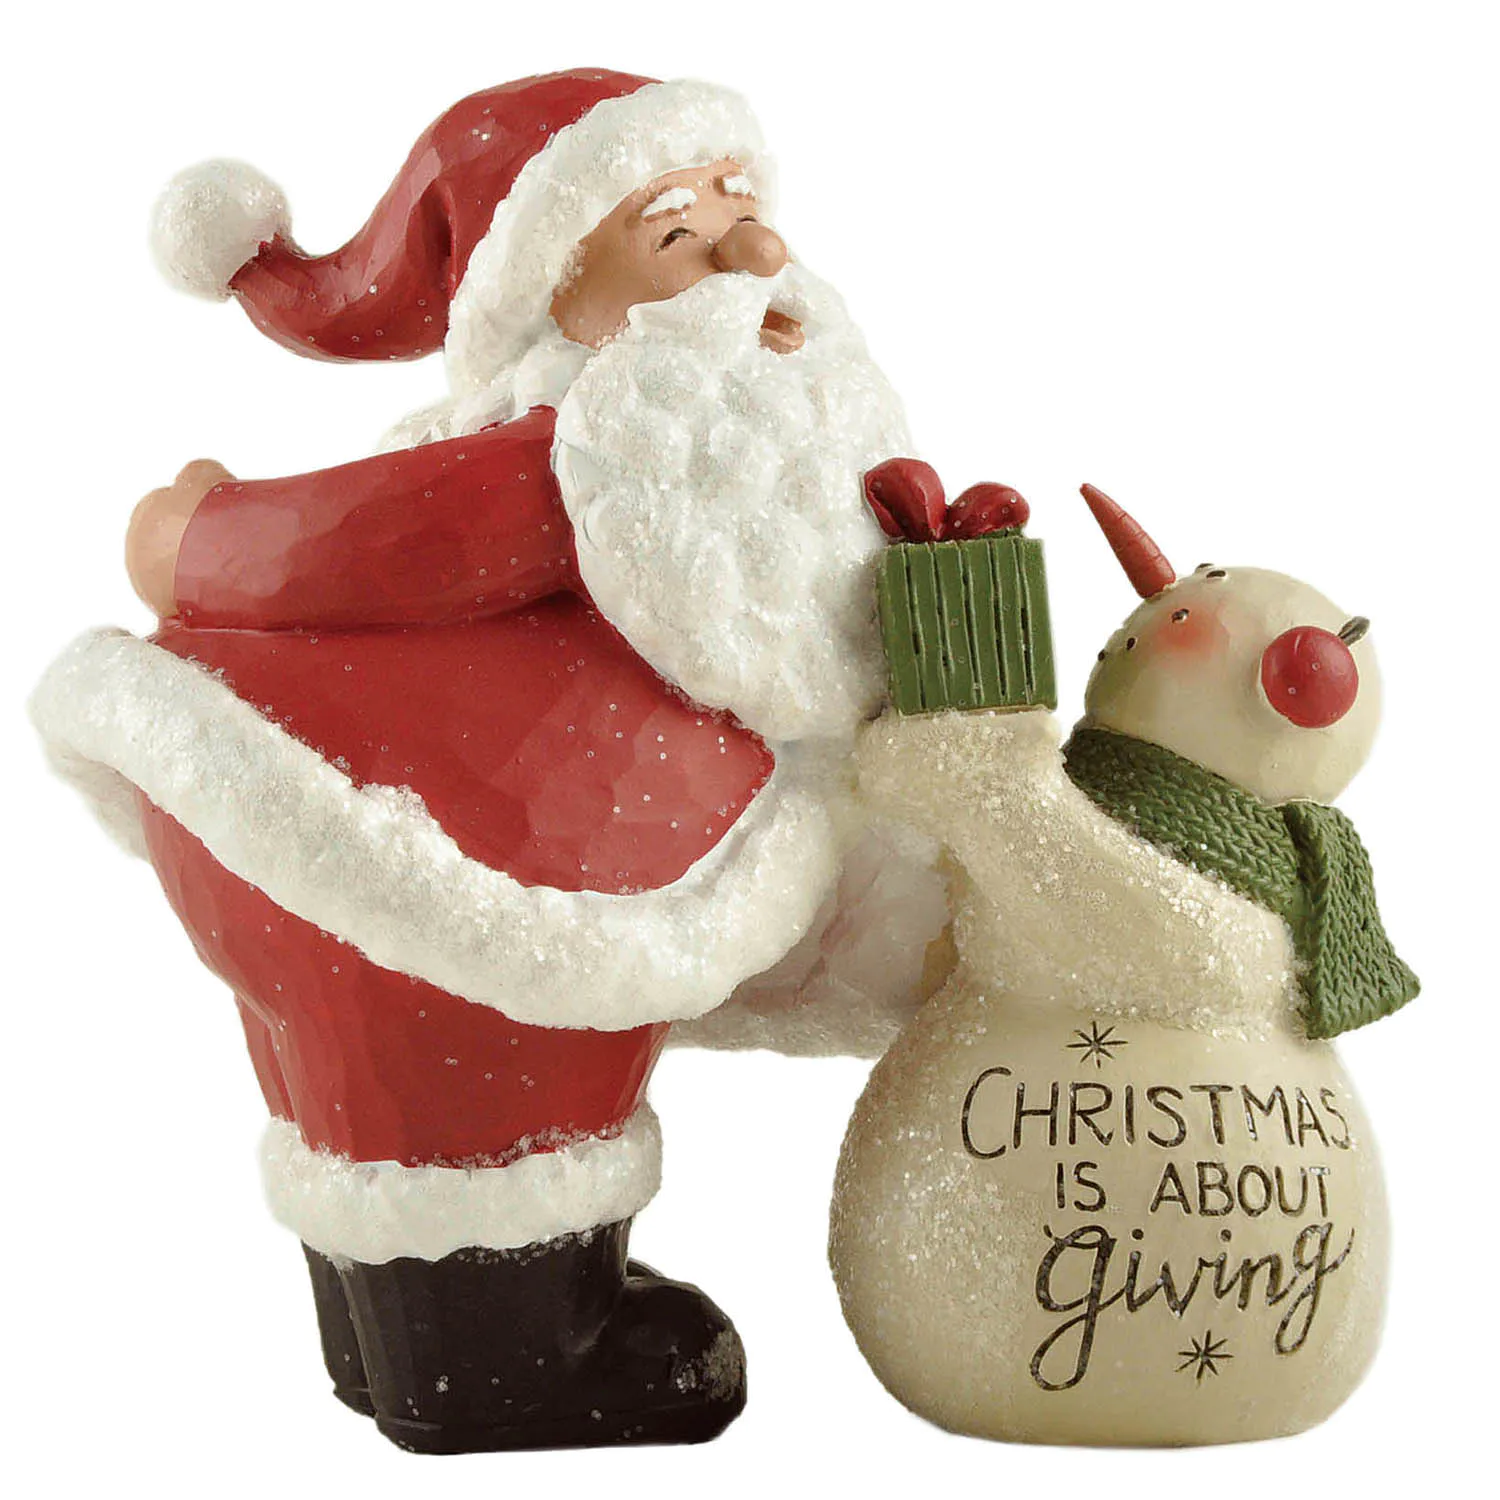 Factory Handmade Resin Christmas Crafts Santa and Gift-Giving Snowman Figurines for Home Decor 238-13786